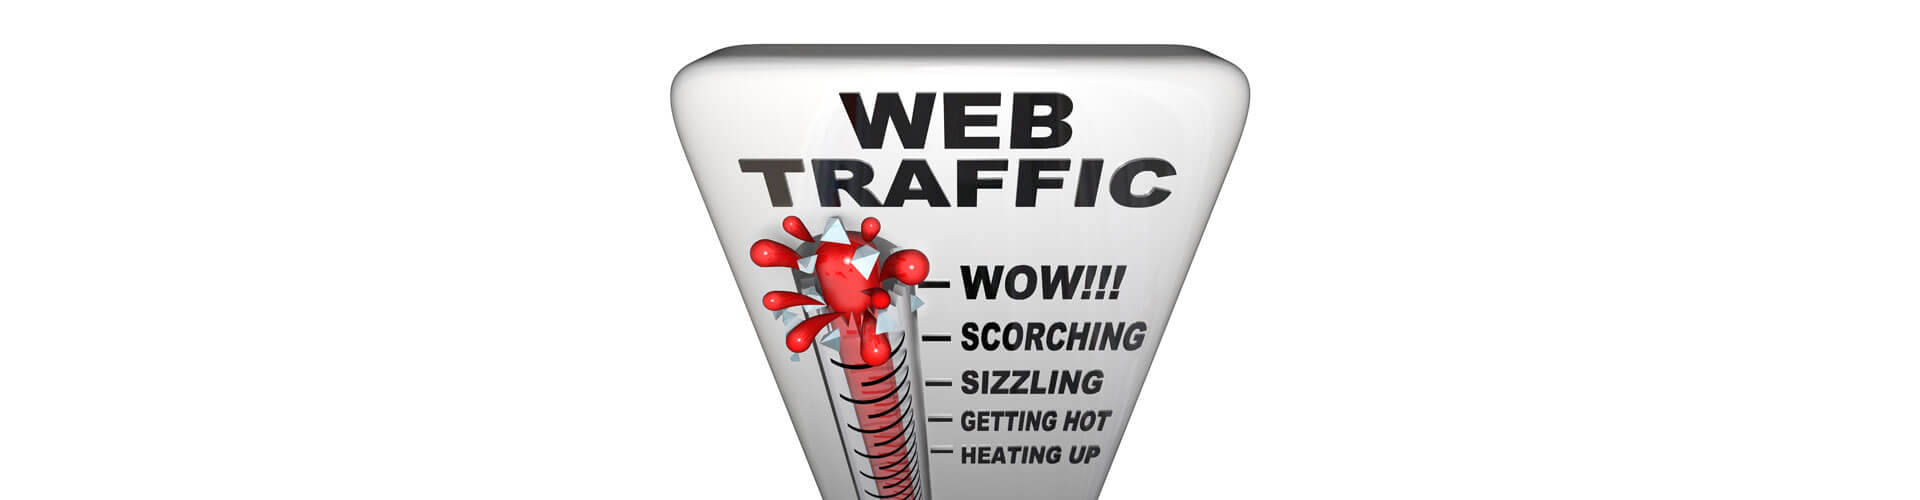 How to Increase Traffic to Your Website